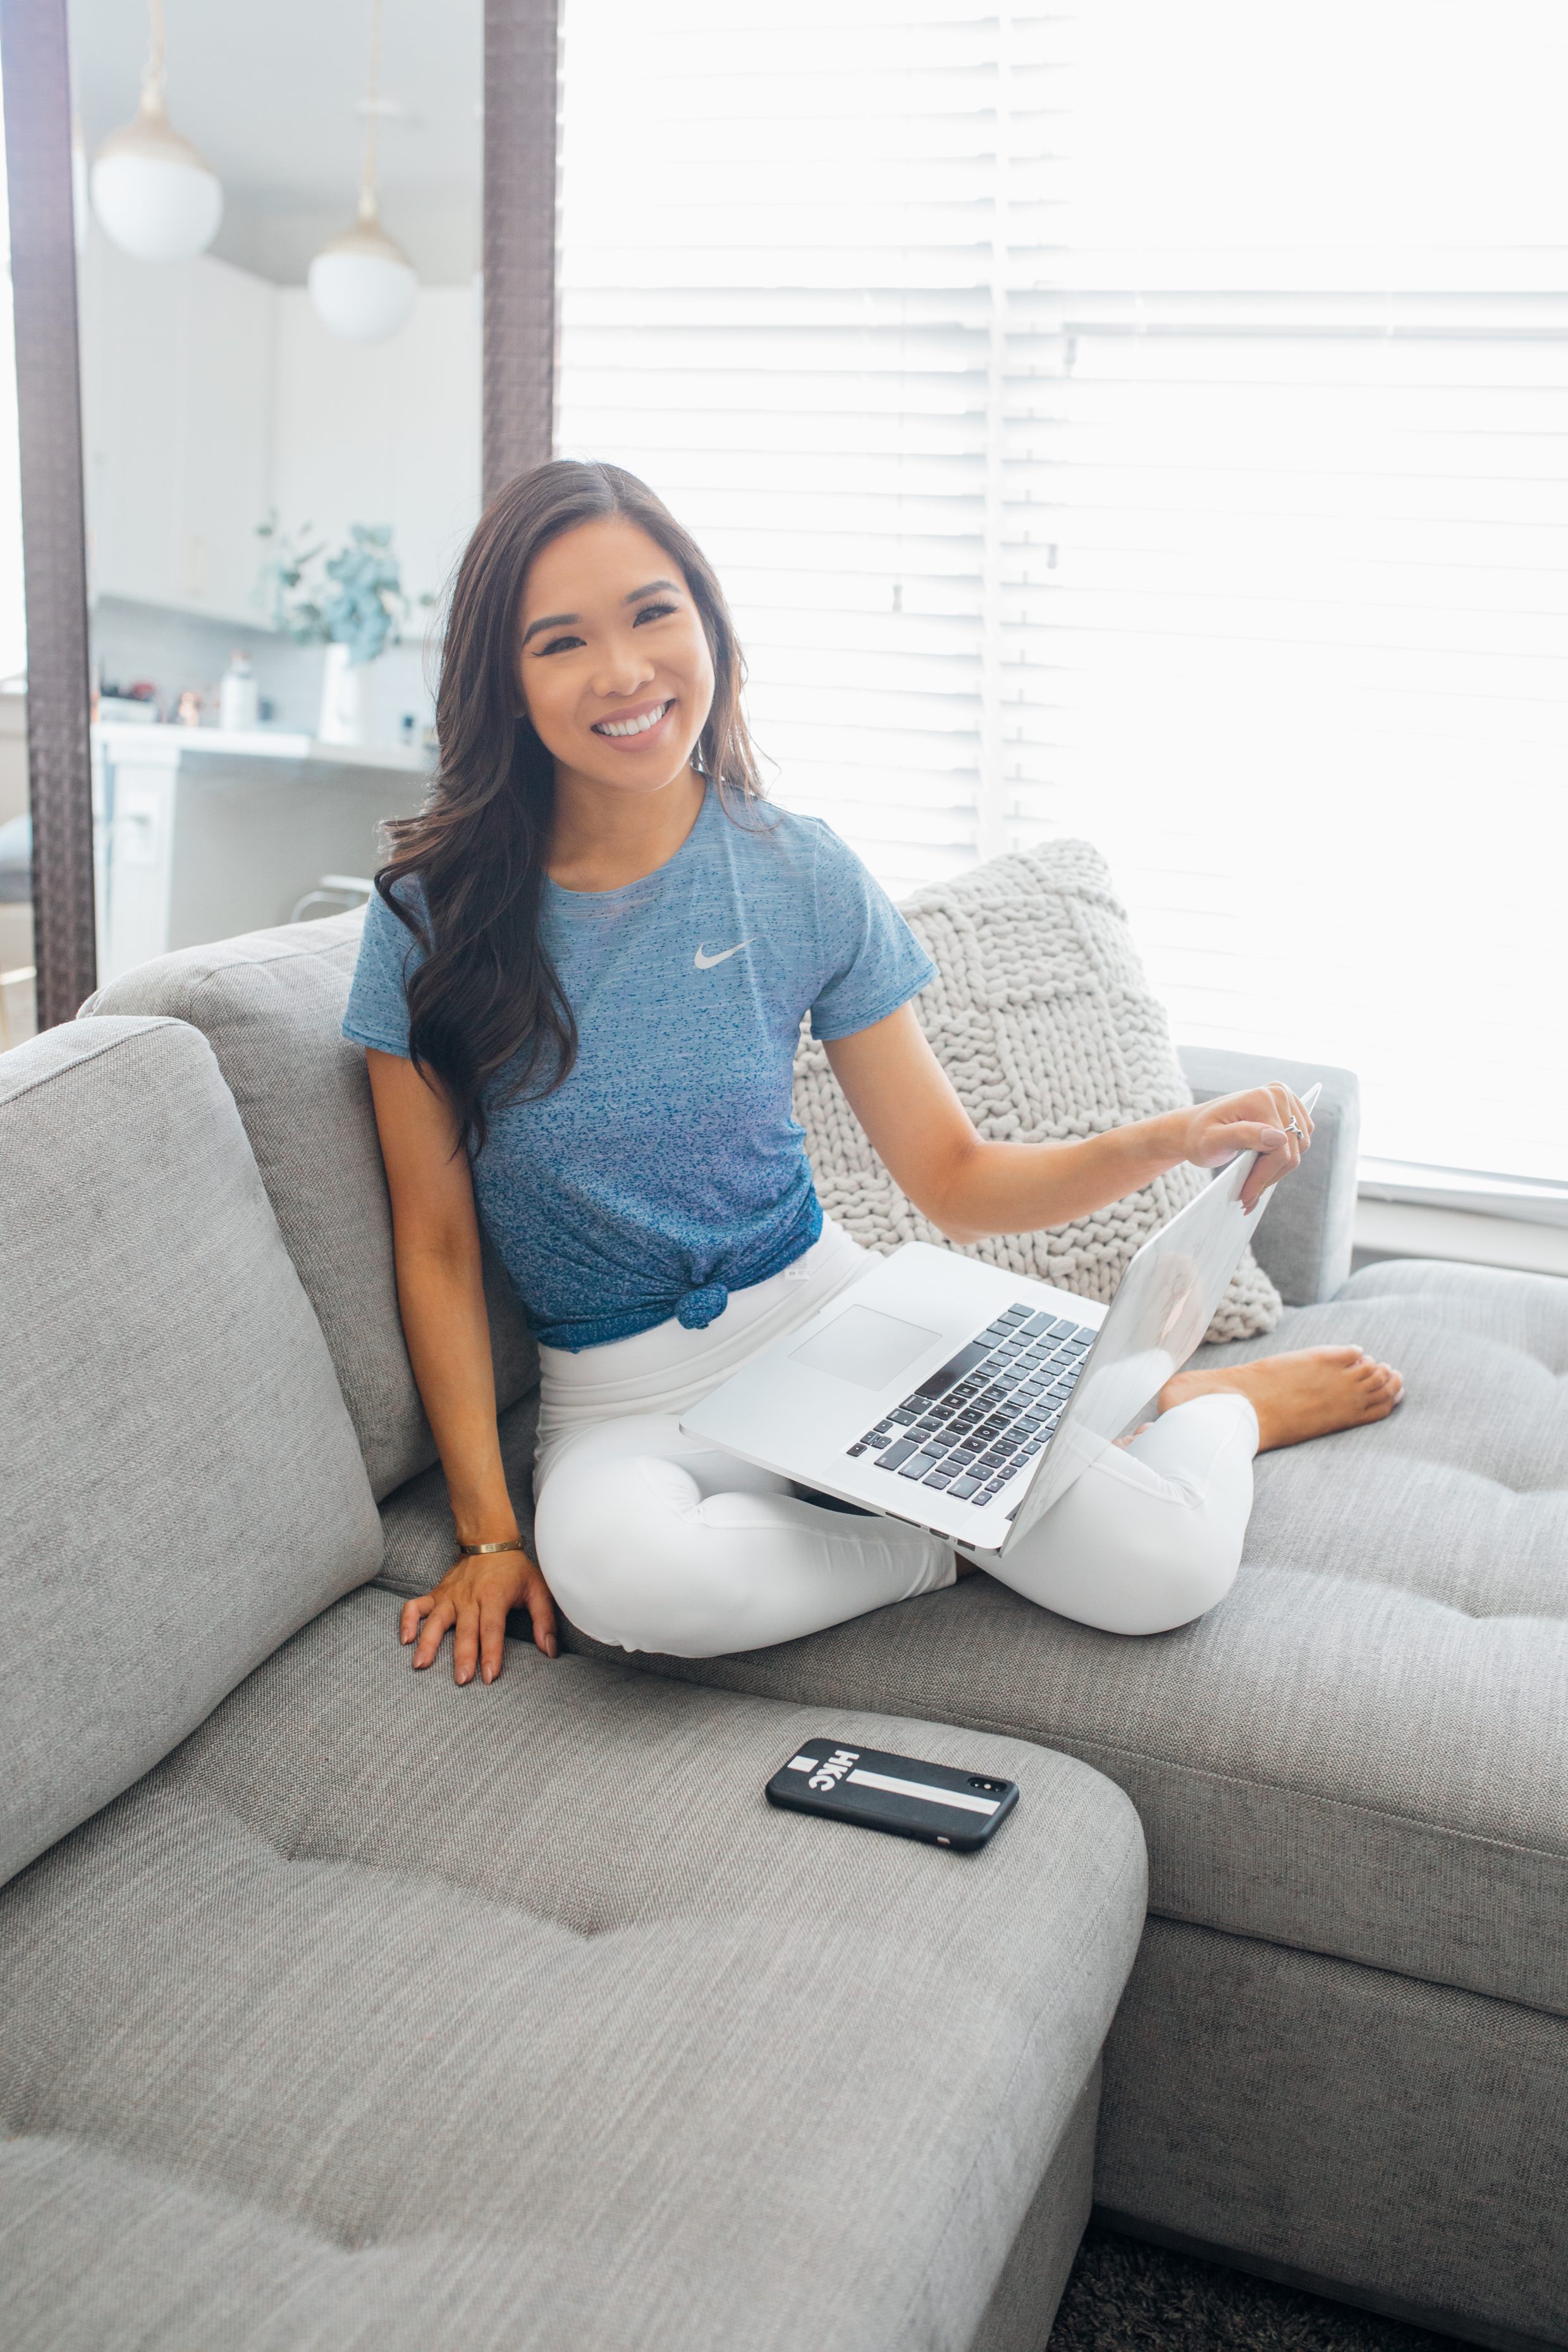 Blogger Hoang-Kim wears a blue and white activewear outfit